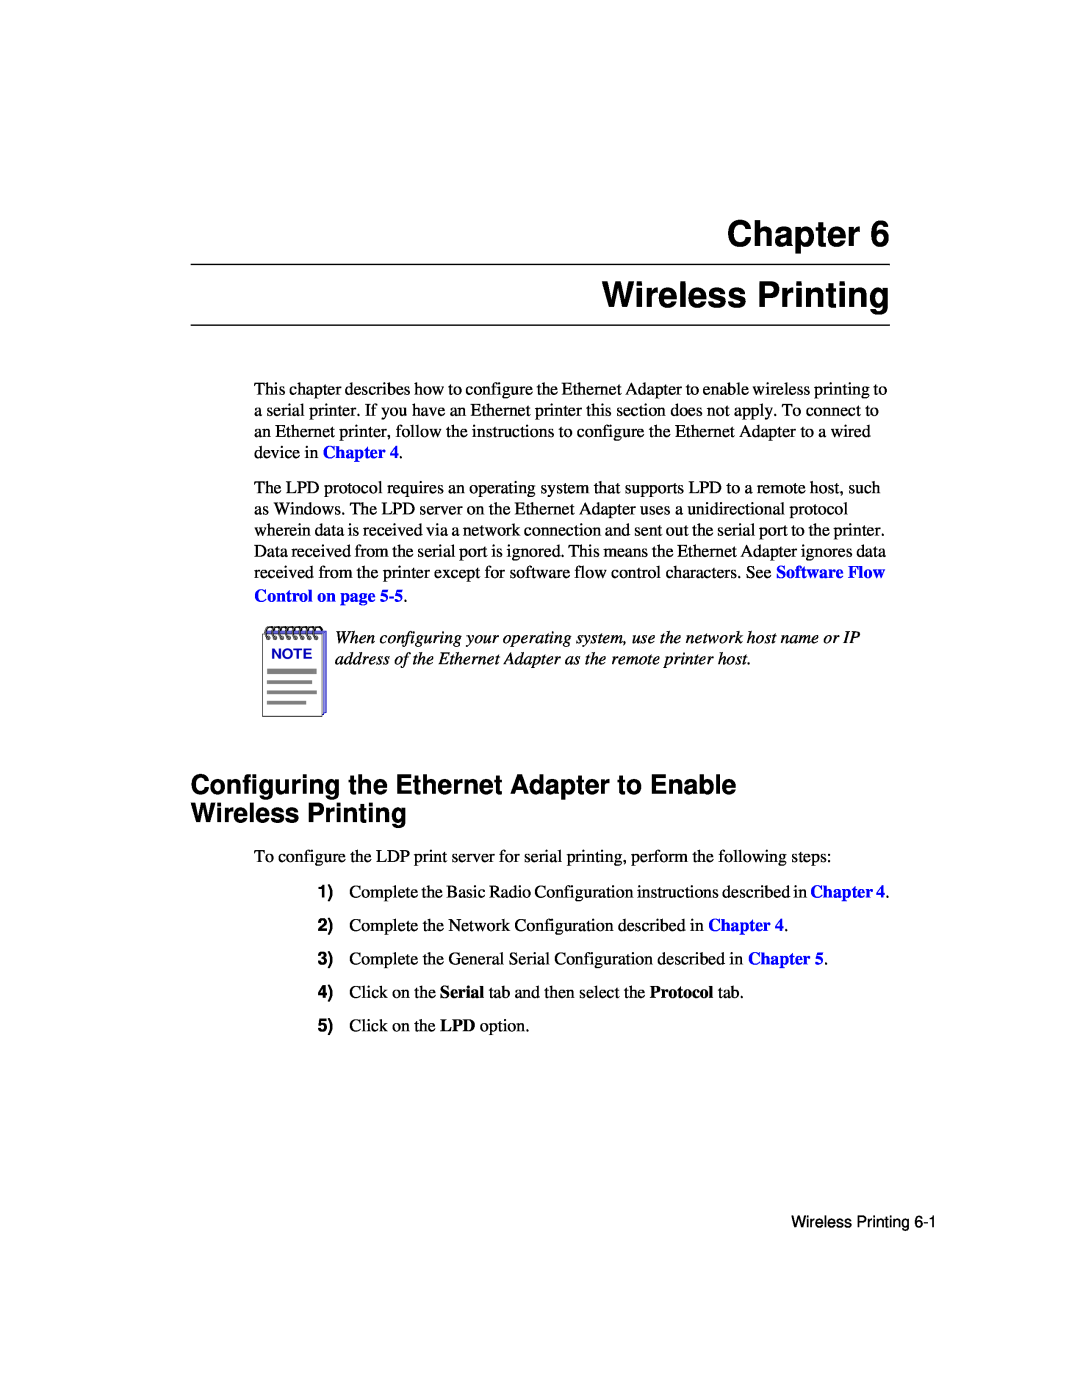 Enterasys Networks Wireless Ethernet Adapter I manual Chapter Wireless Printing, Control on page 